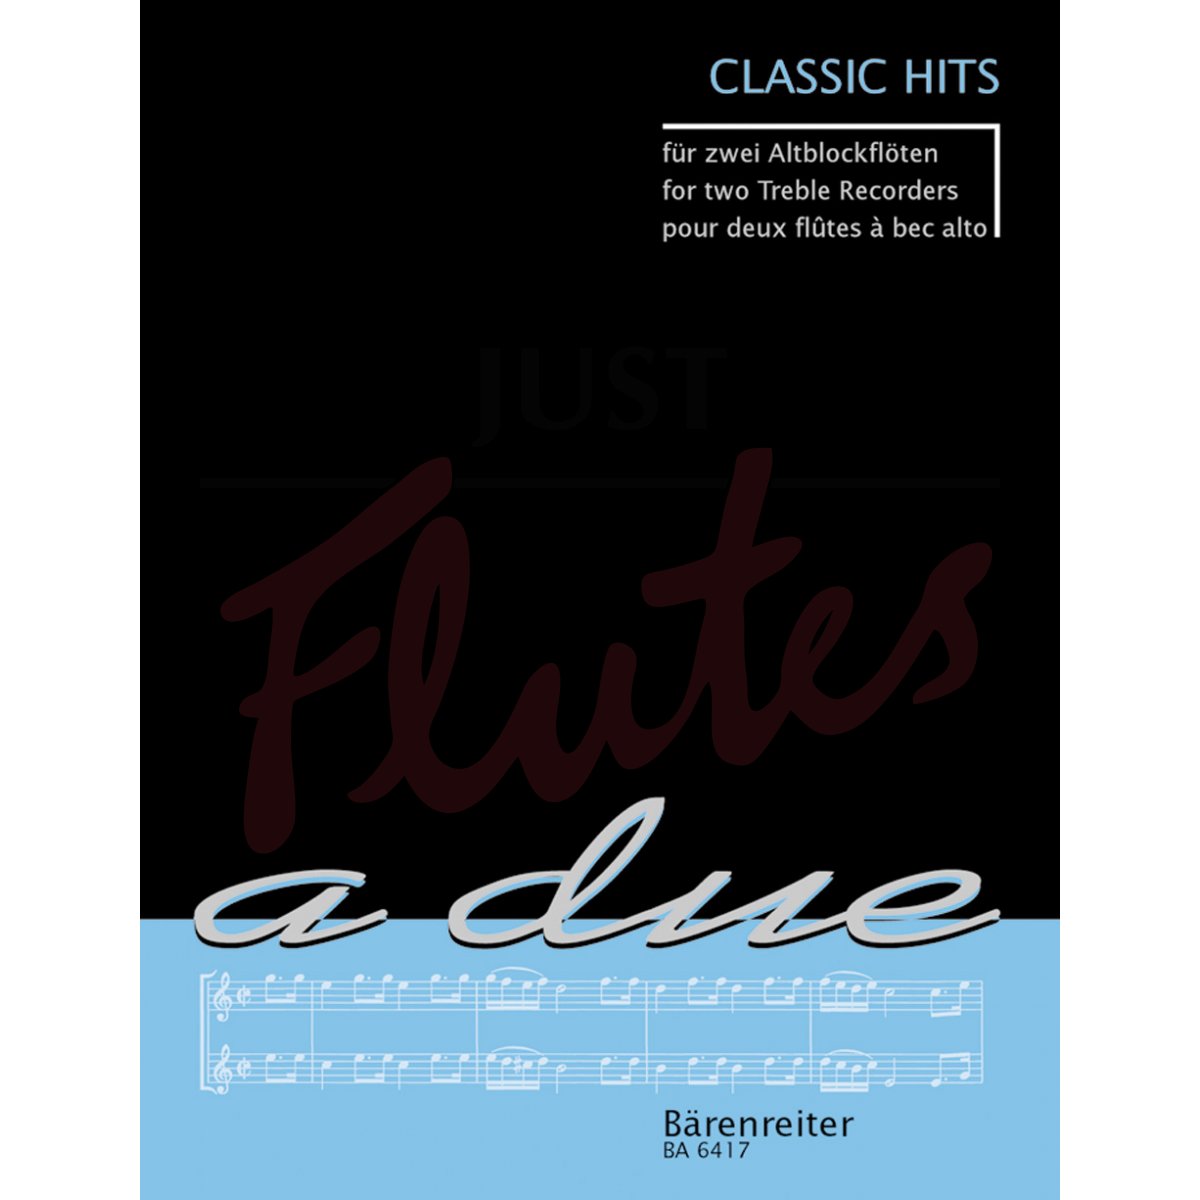 Classic Hits for Two Treble Recorders